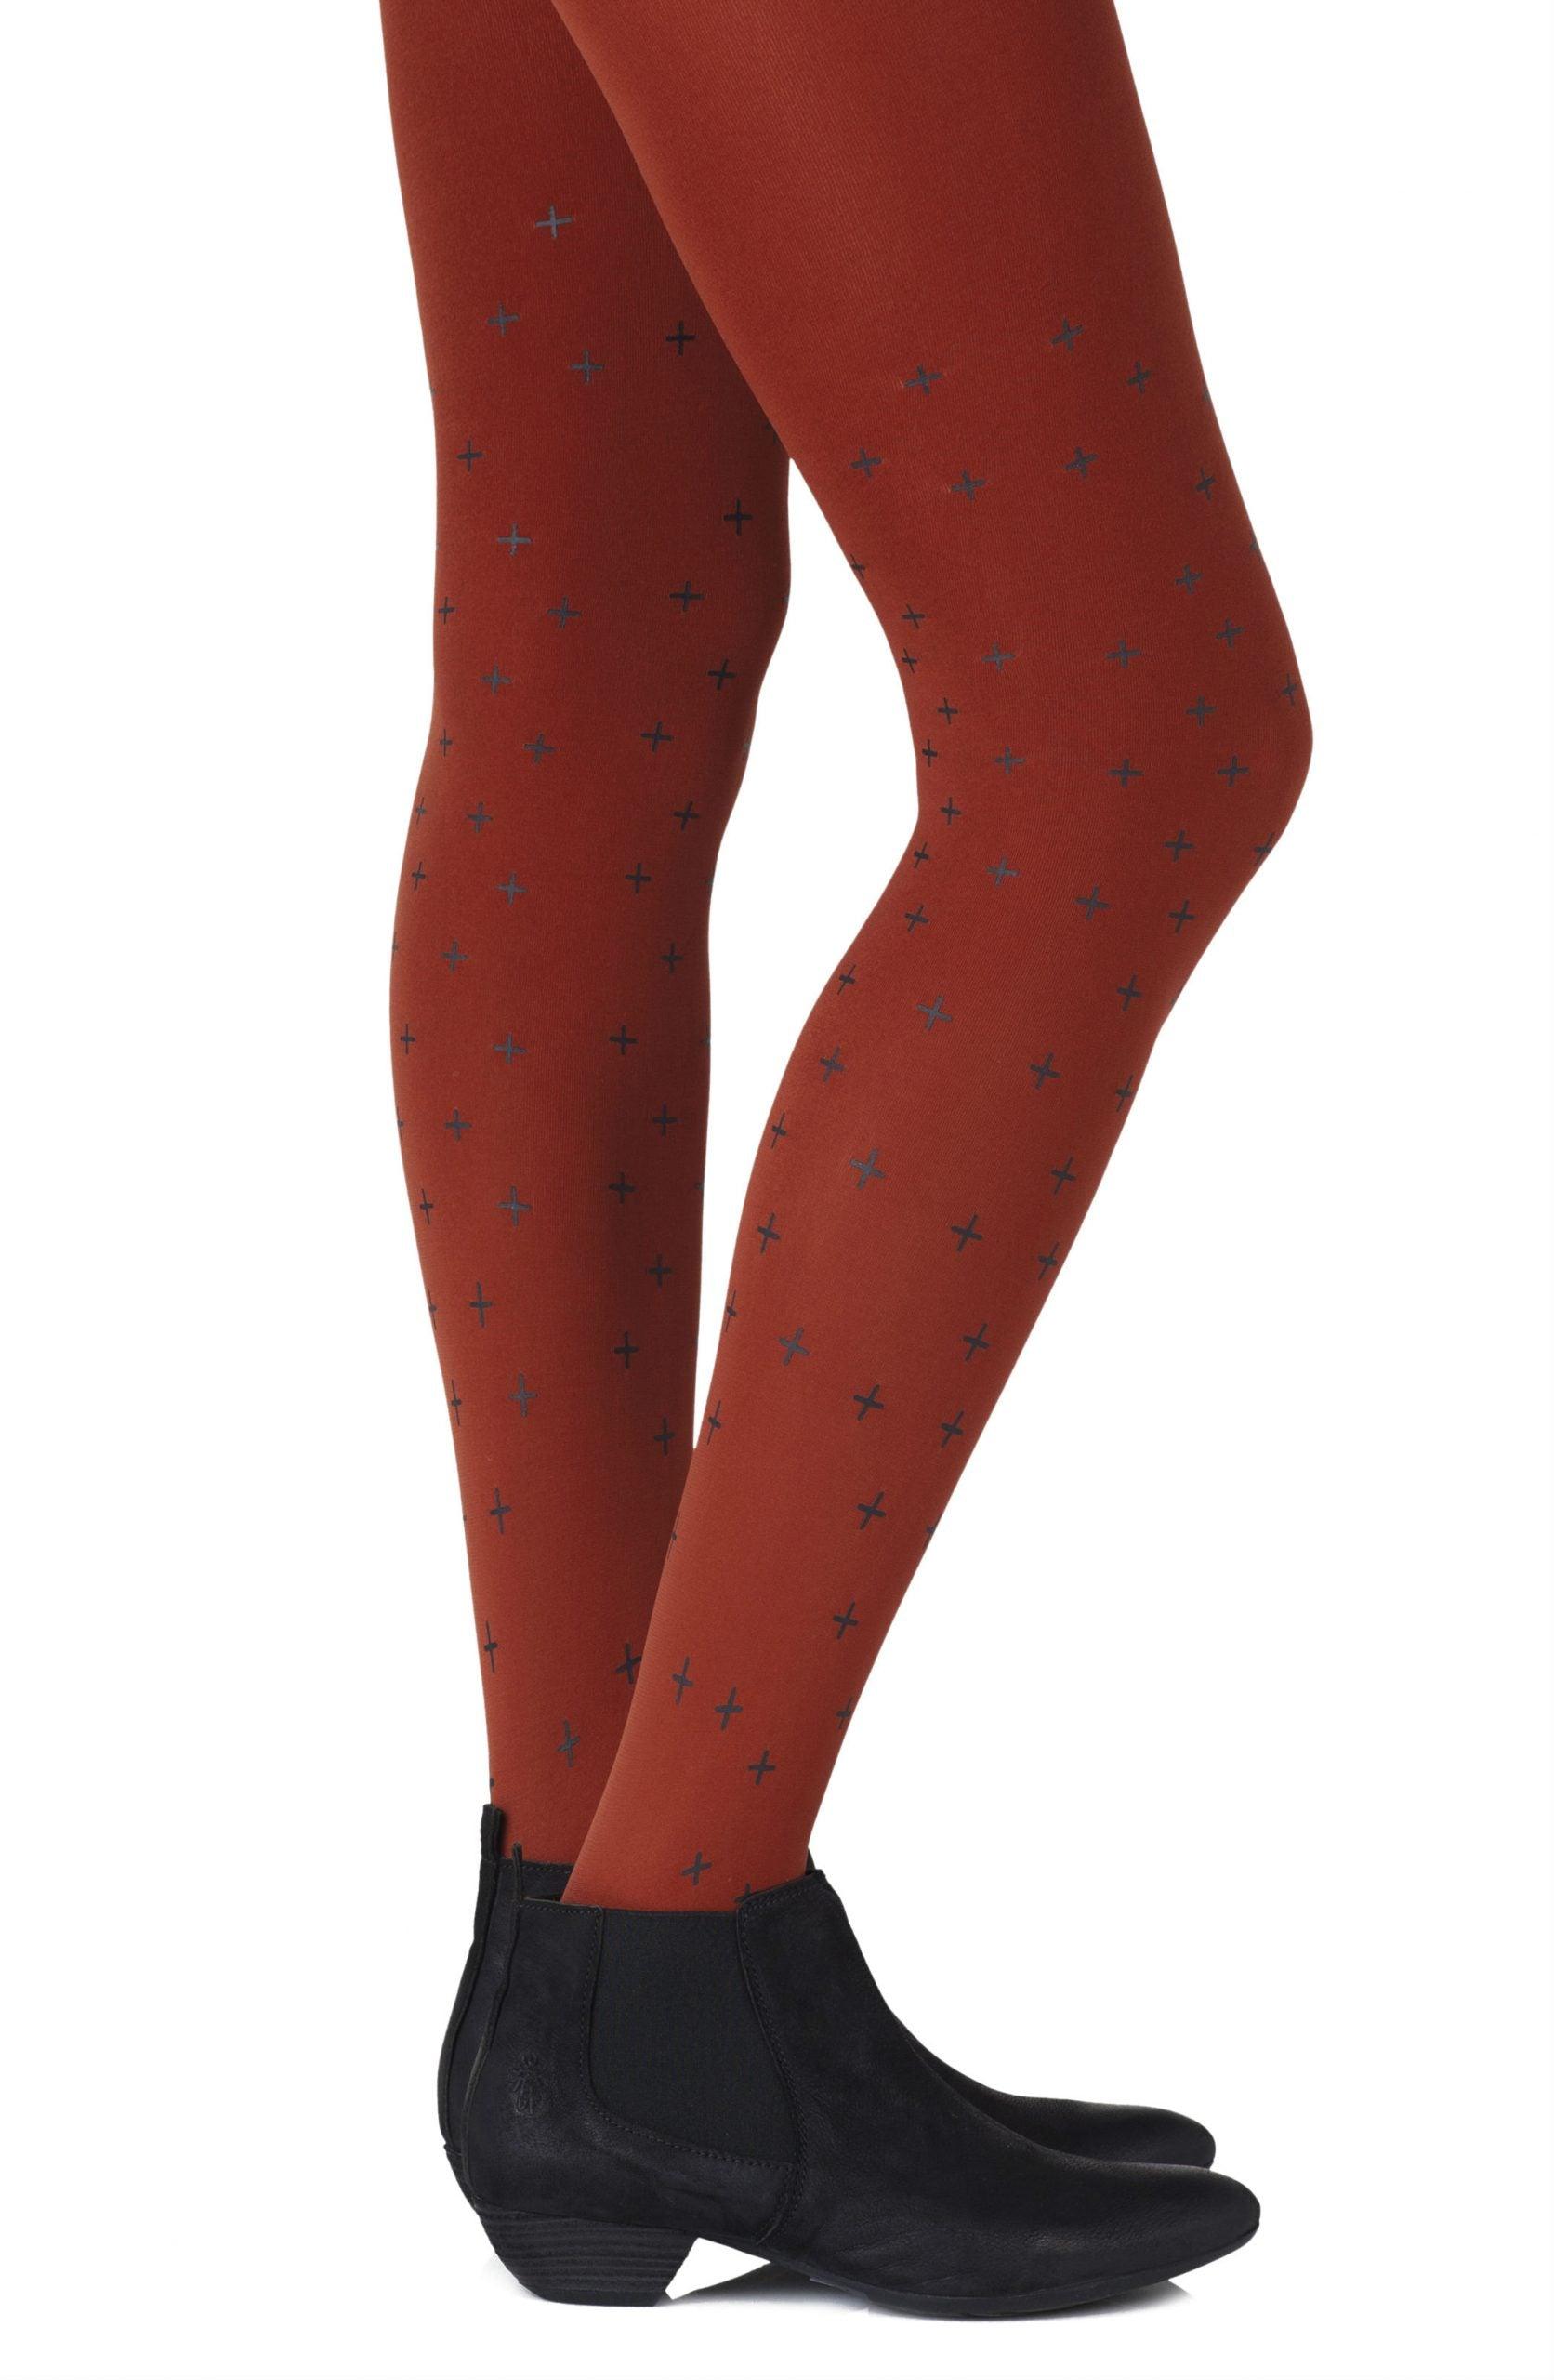 Zohara "You + Me = Love" Rust Tights - Sydney Rose Lingerie 